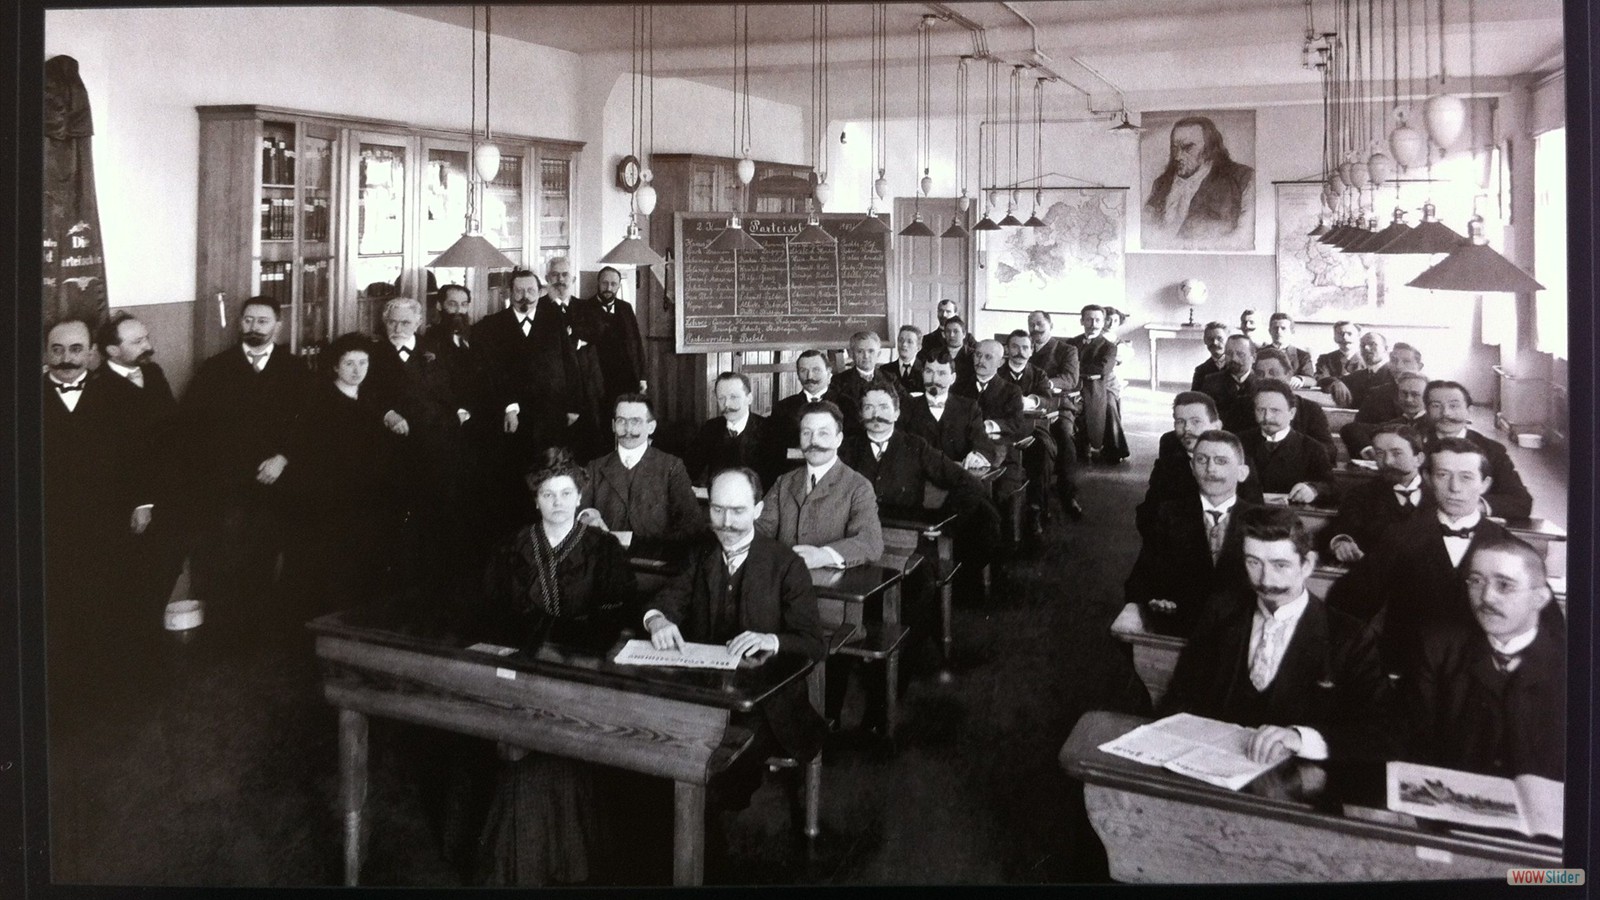 SPD Party Schoool, Berlin (1908): Rosa Luxemburg ( standing left), Wilhelm Pieck (seated to right of Luxemburg) and Friedrich Ebert (third row back on left-hand side of right row)